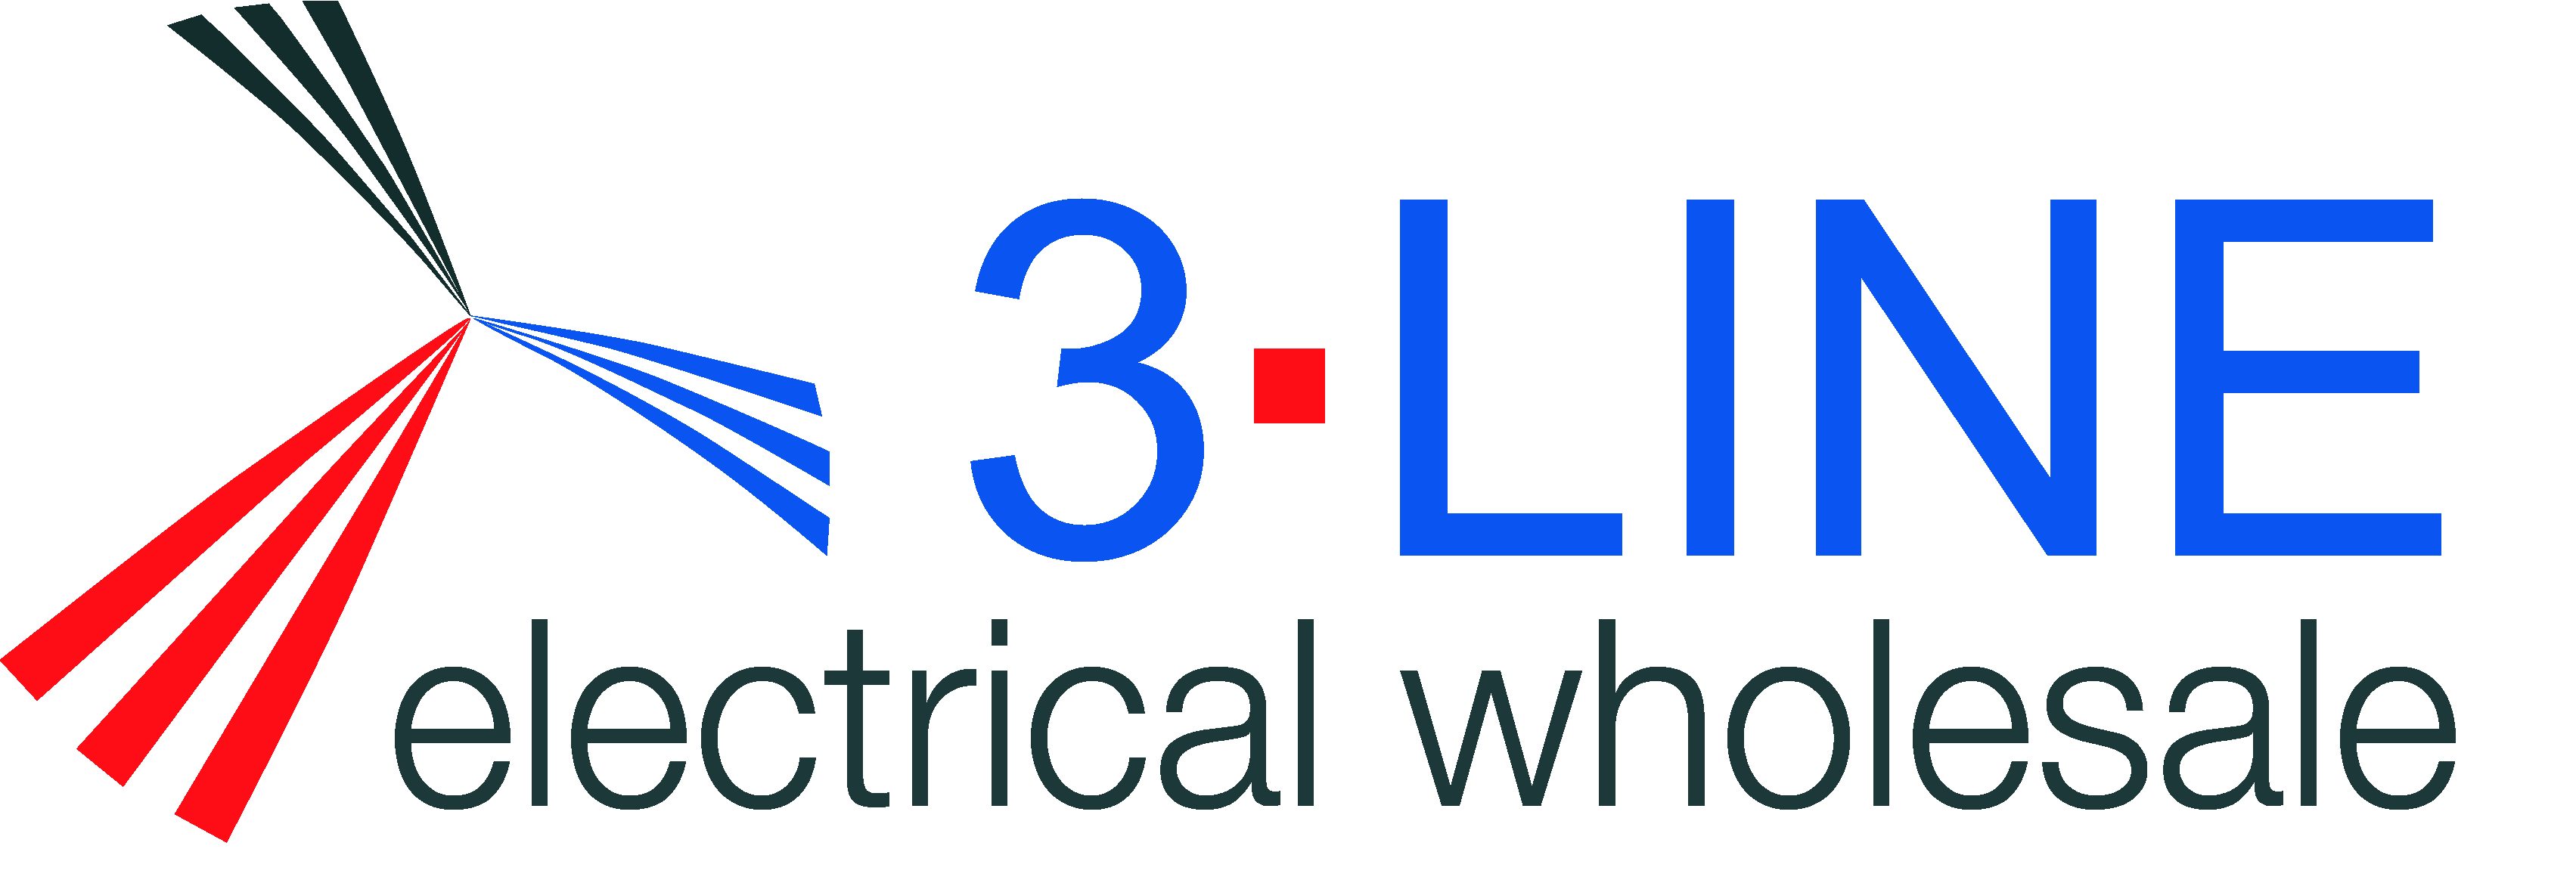 3 Line Electrical, Best Wholesaler: 6-25 Branches